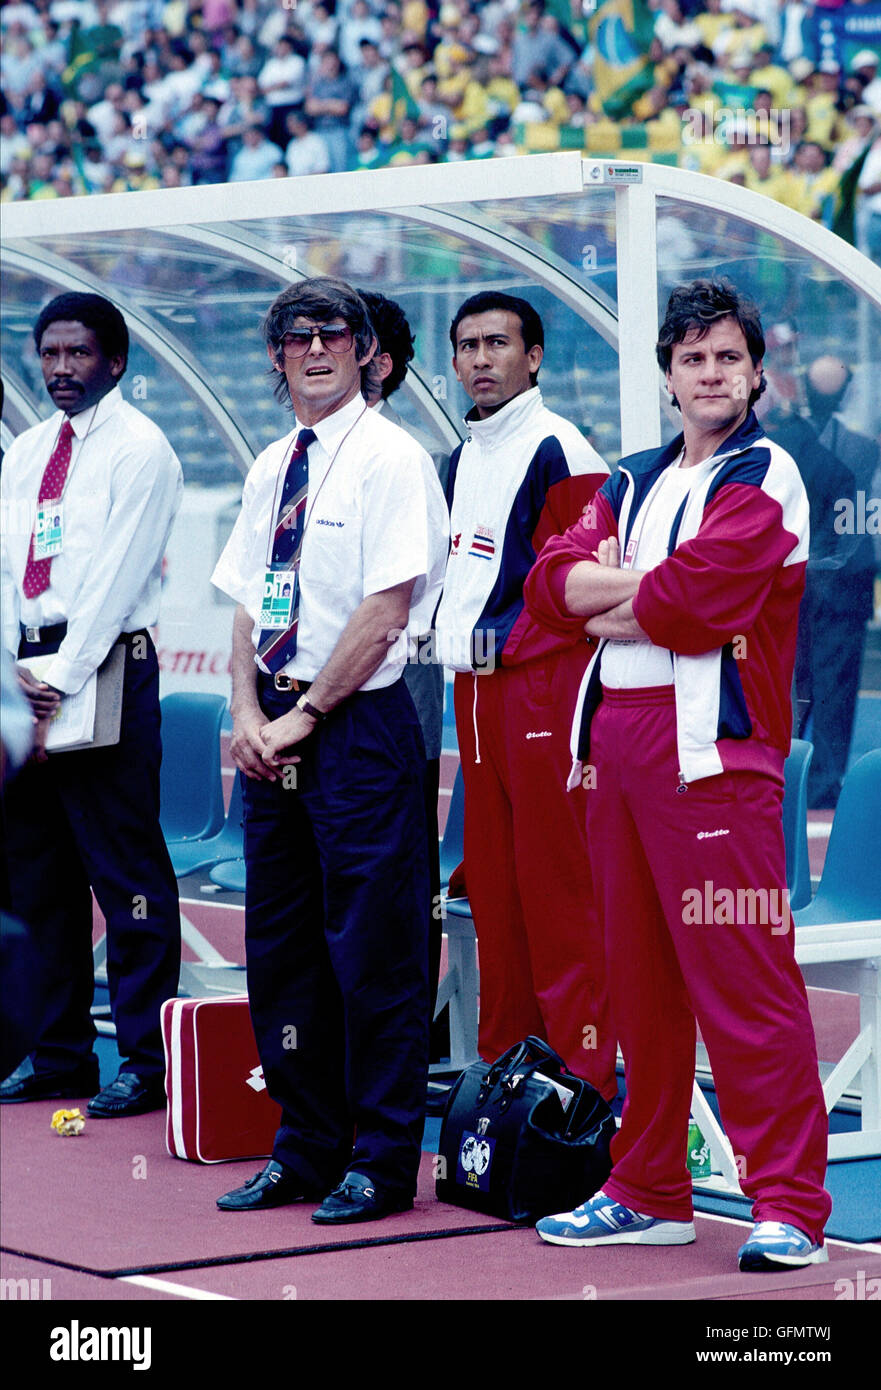 Bora Milutinovic (CRC), JUNE 16, 1990 - Football / Soccer : Costa Rica head coach Velibor 'Bora' Milutinovic (2nd L) during the 1990 FIFA World Cup Italy Group C match between Brazil 1-0 Costa Rica at Stadio delle Alpi in Turin, Italy. (Photo by Juha Tamminen/AFLO) (Minumum pricing : EUR100 per picture) Stock Photo